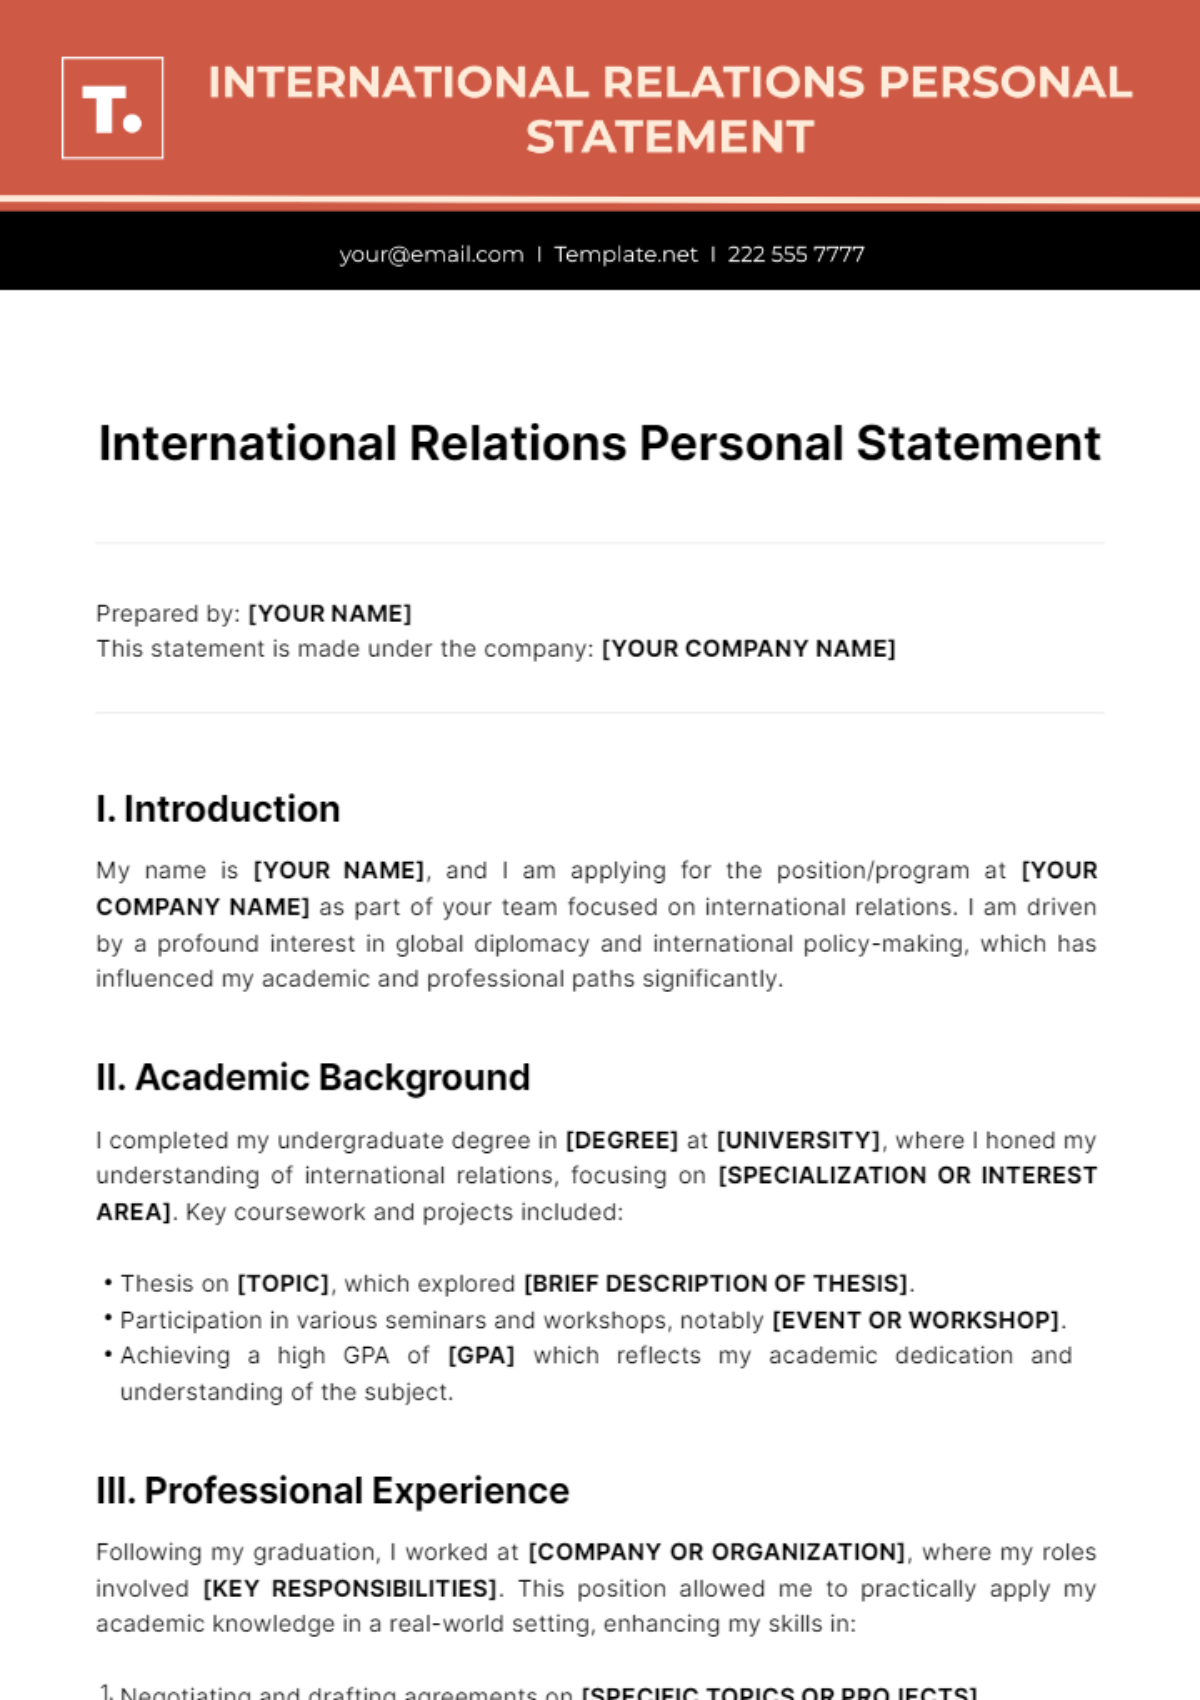 International Relations Personal Statement Template